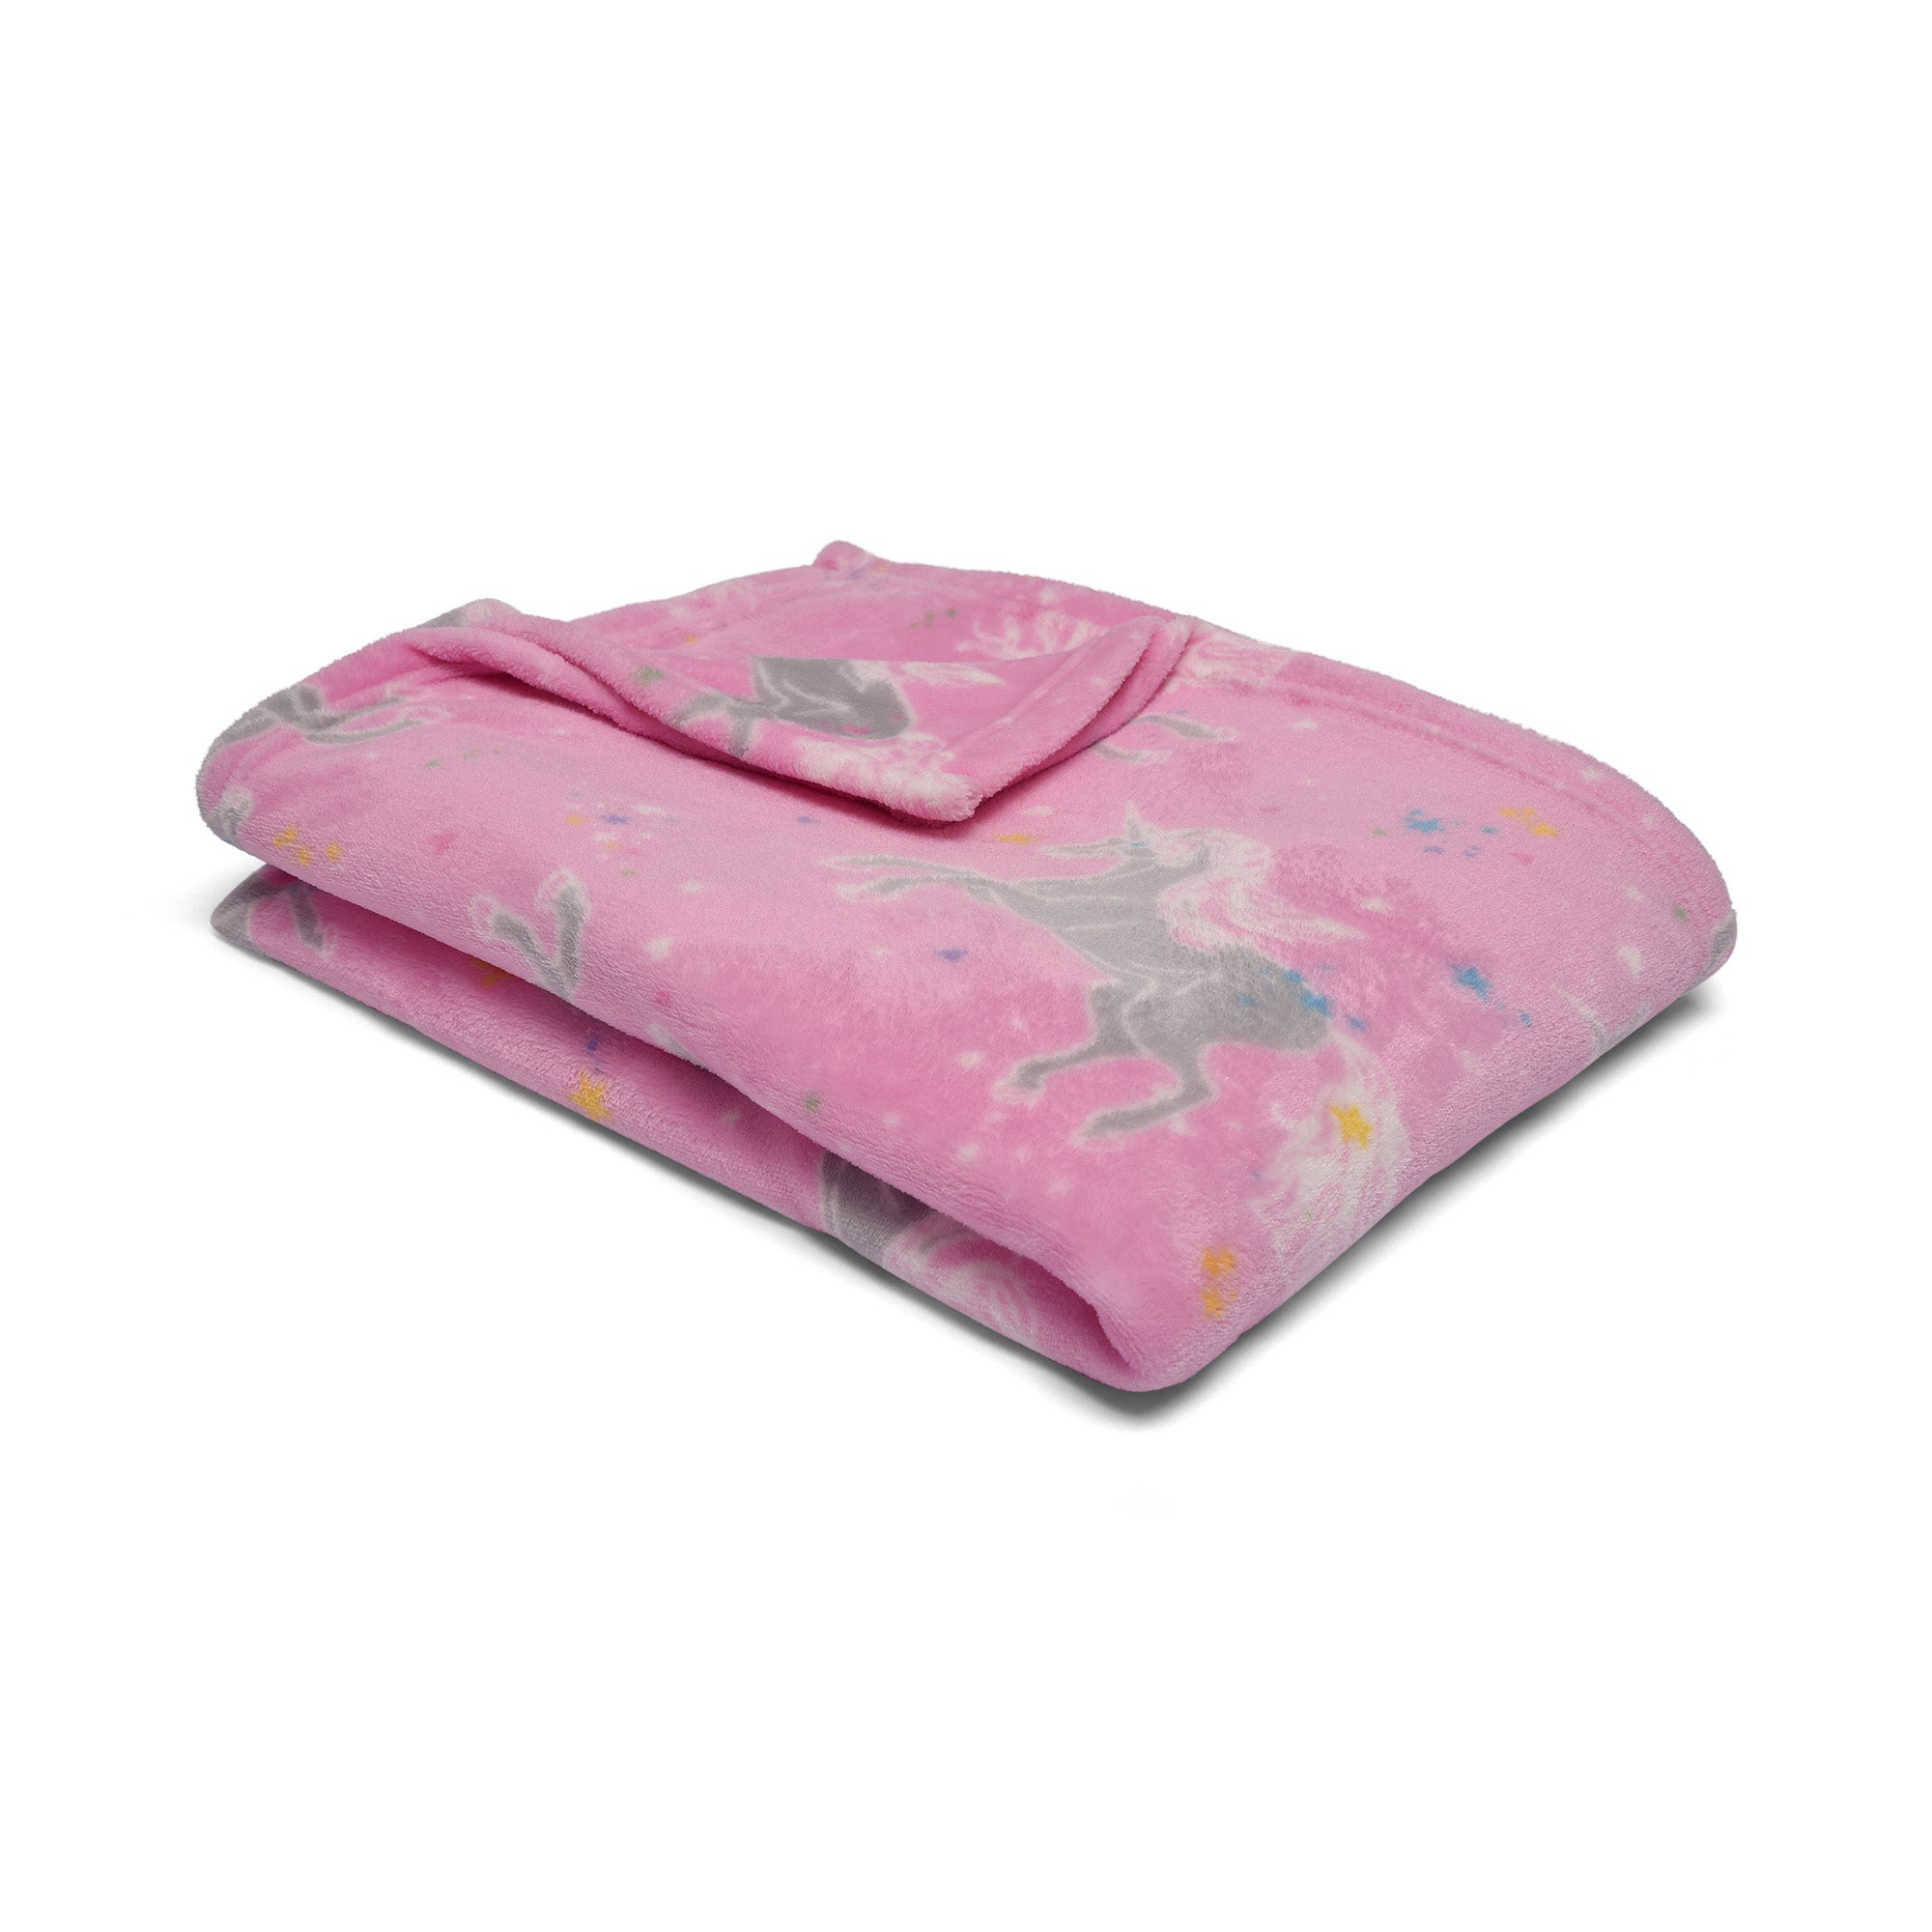 Throw Unicorn by Bedlam in Pink